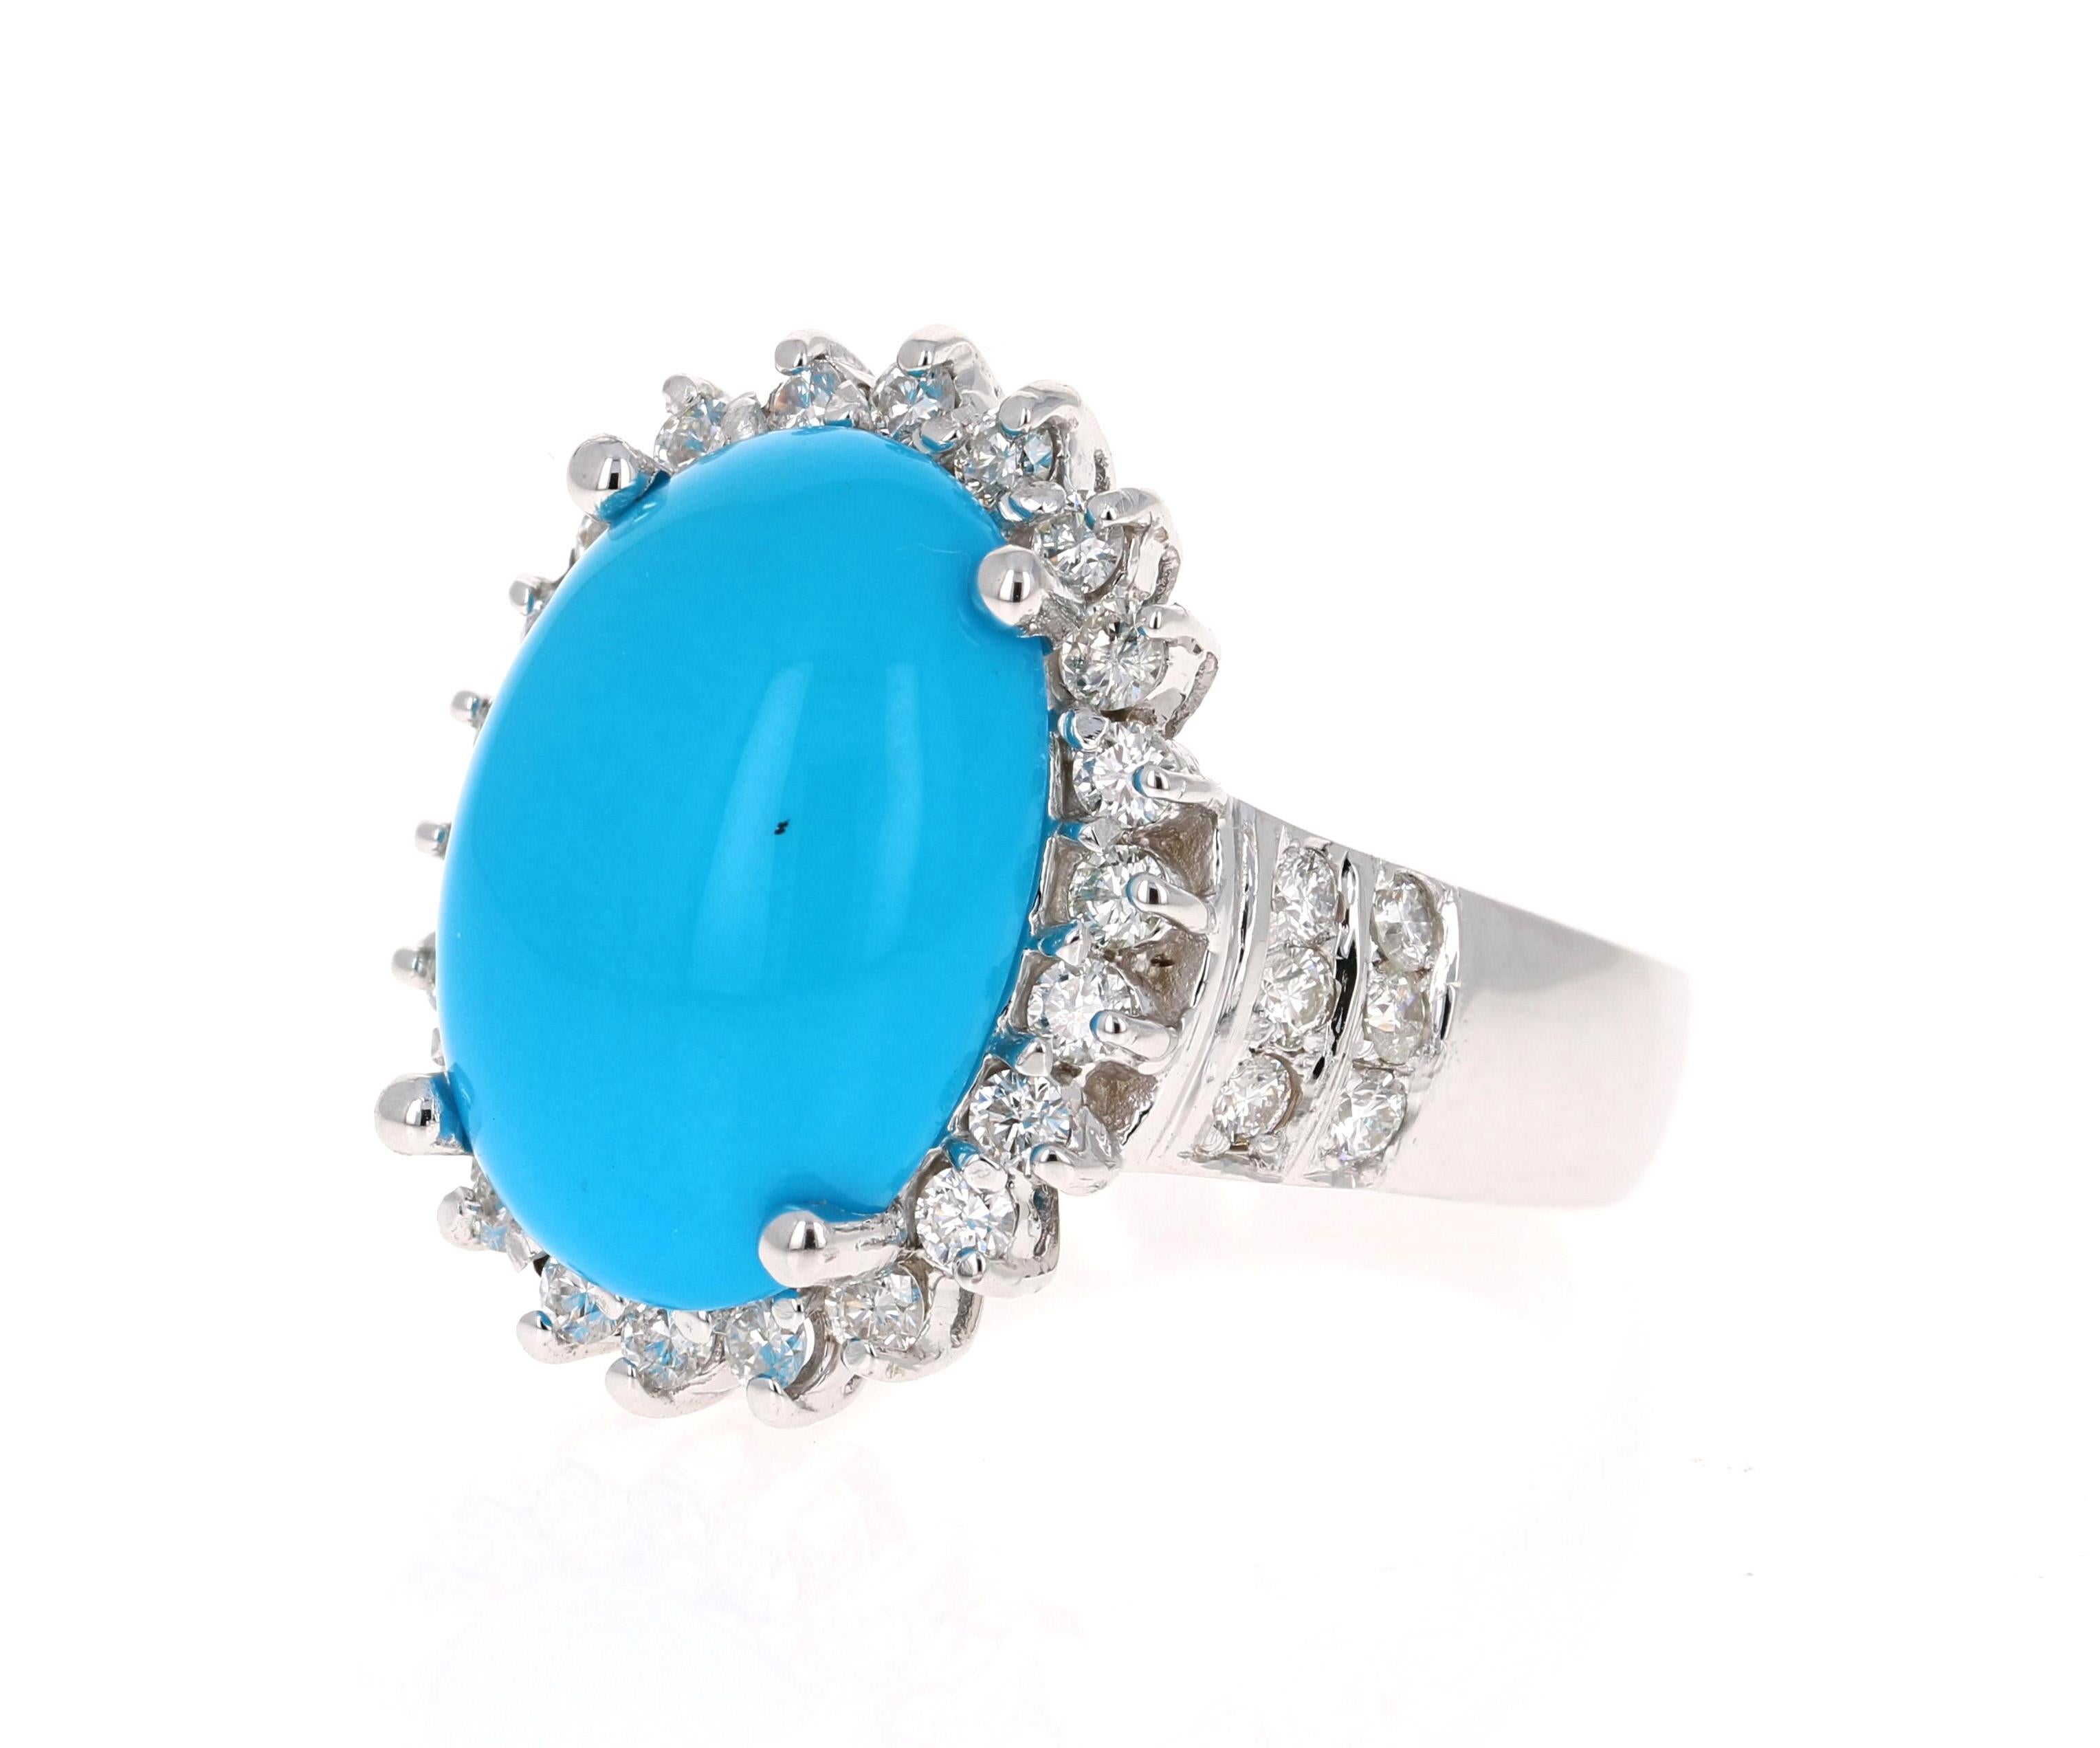 The Oval Cut Turquoise is 8.55 Carats and is surrounded by a Halo of beautifully set diamonds. 
There are 36 Round Cut Diamonds that weigh 1.15 Carats (Clarity: SI2, Color: F).
The total carat weight of the ring is 9.70 Carats. 
The ring is crafted